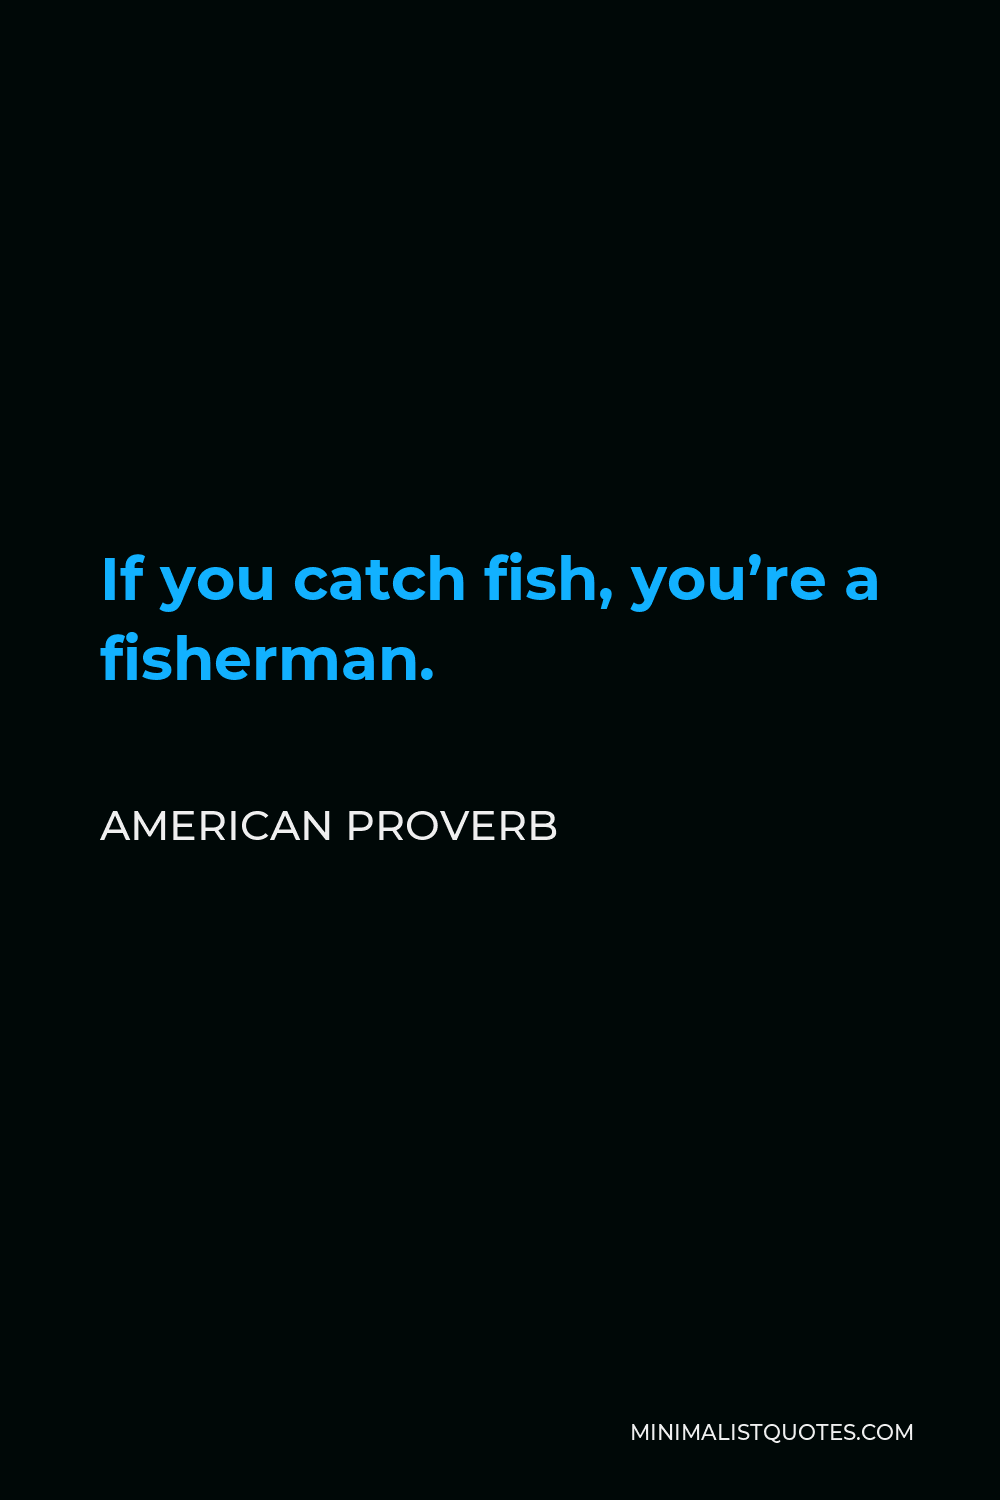 American Proverb Quote - If you catch fish, you’re a fisherman.